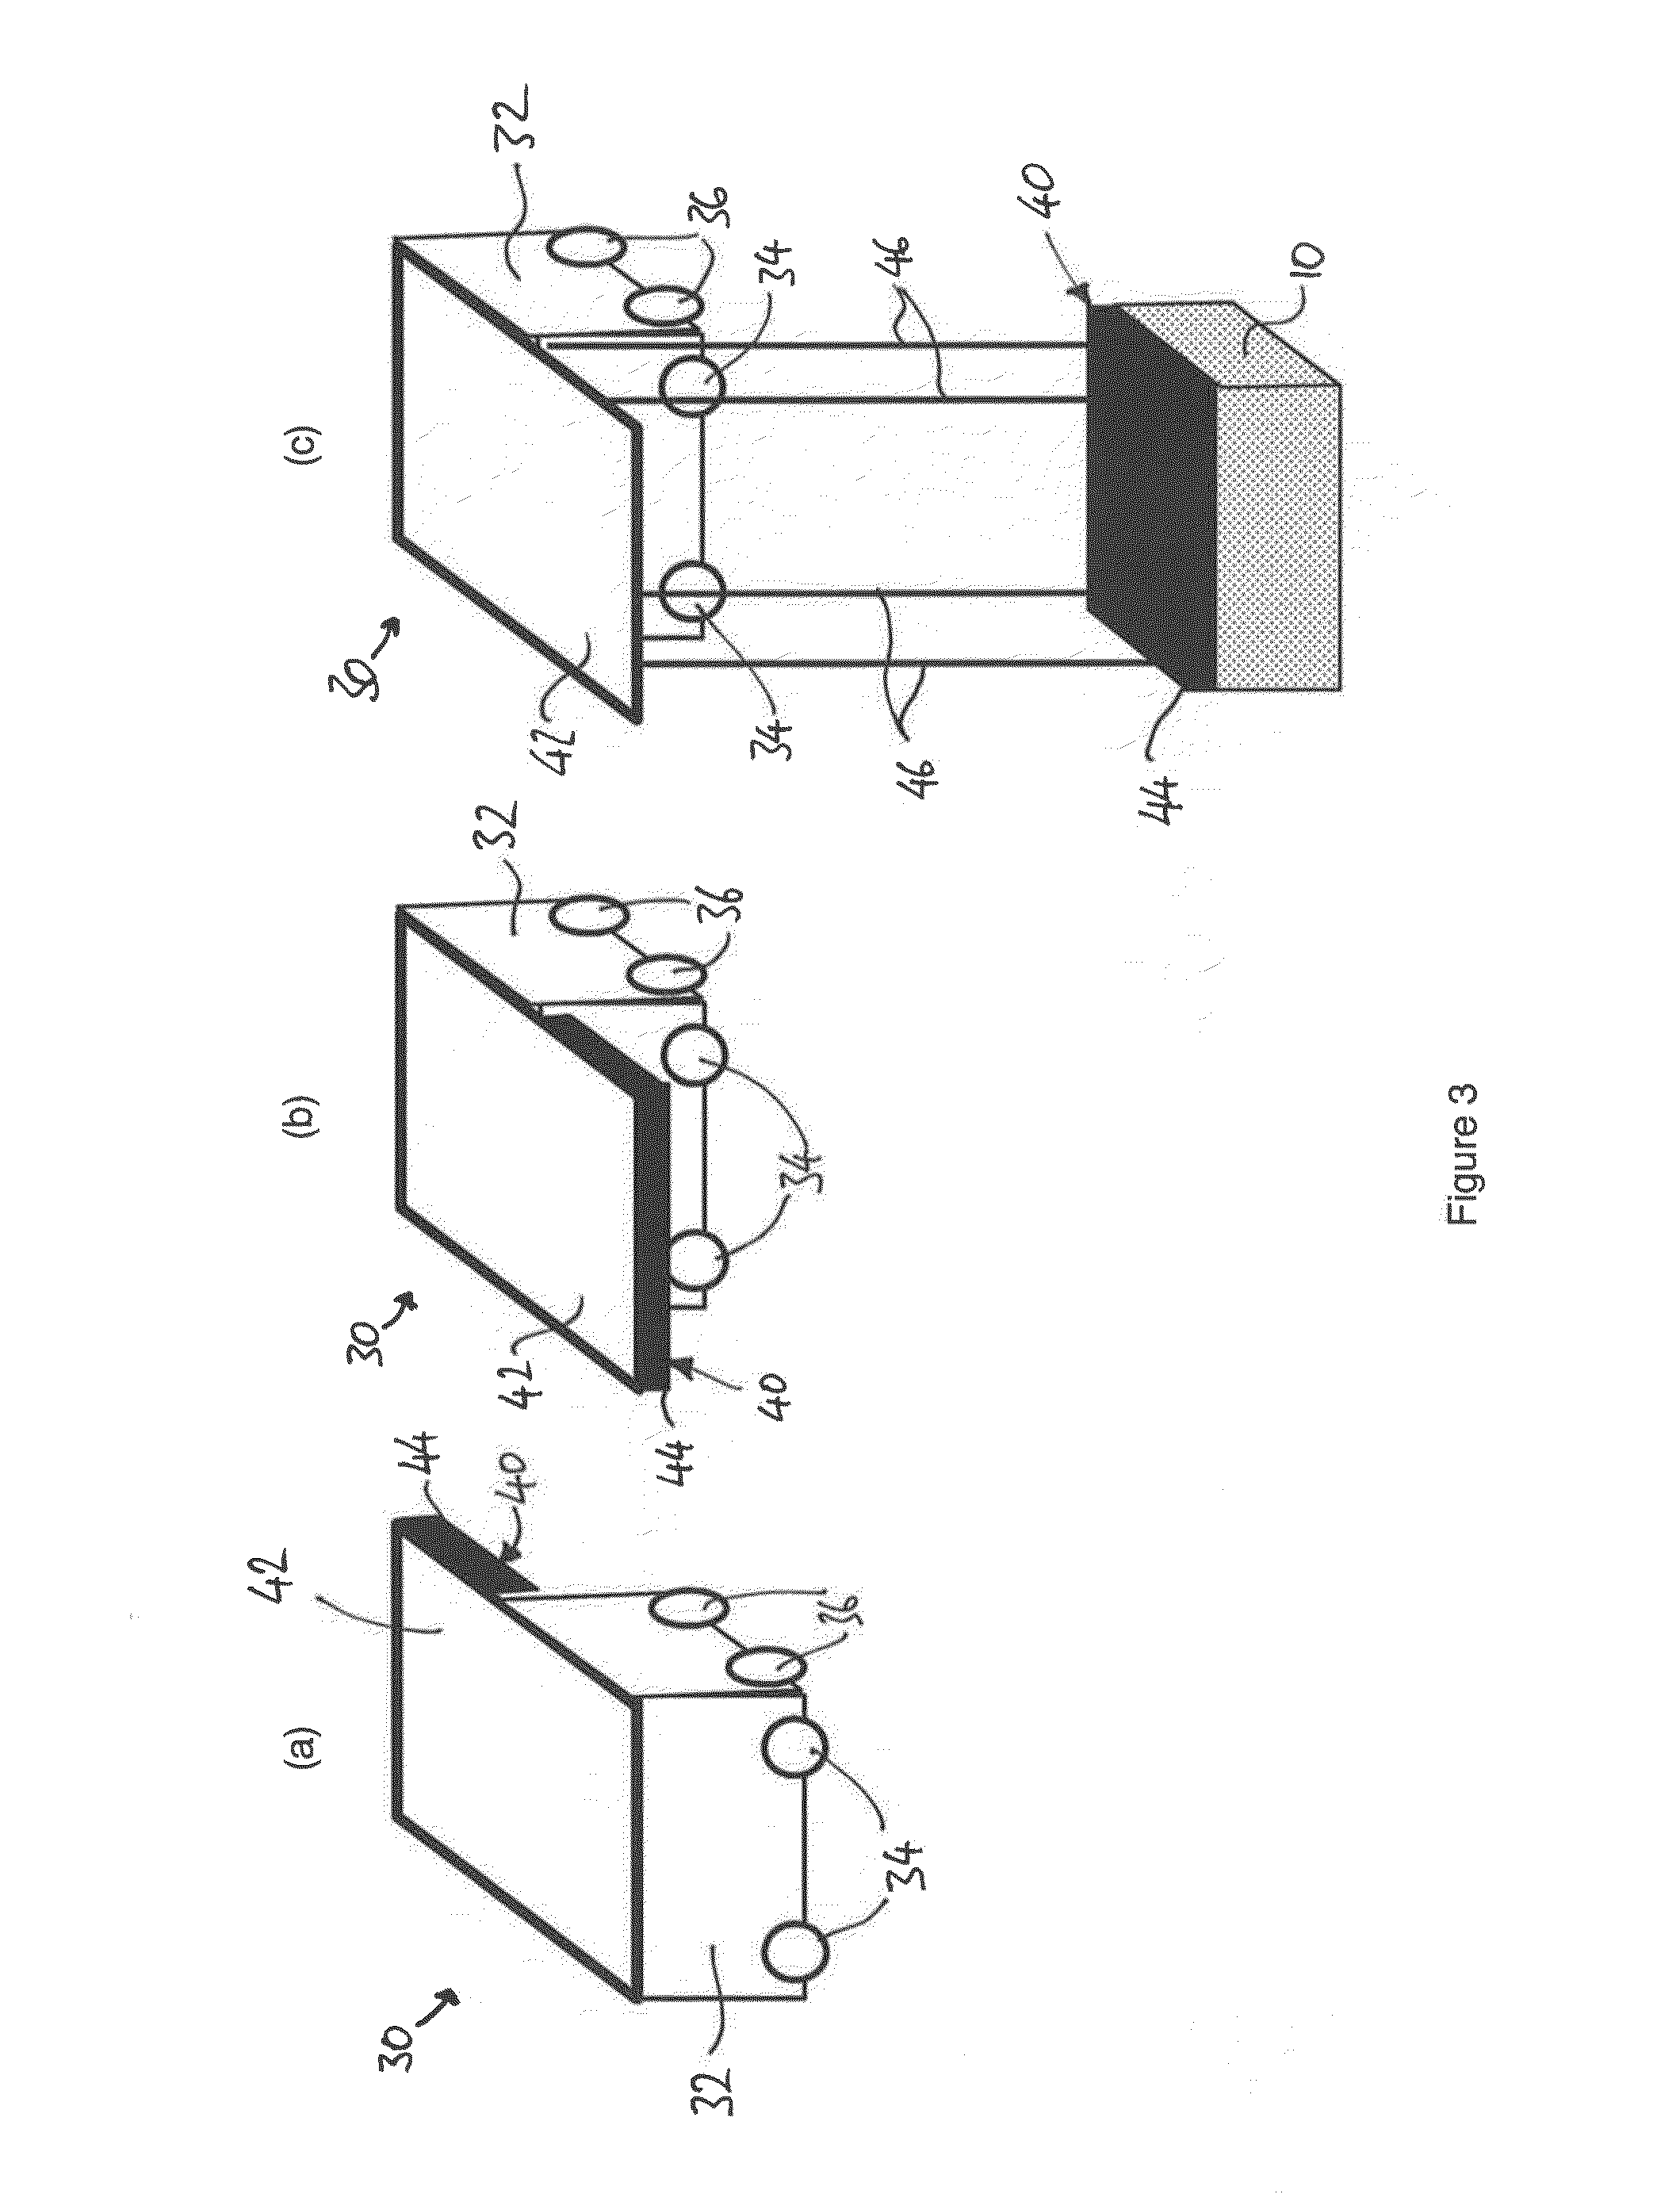 Storage systems and methods for retrieving units from a storage system